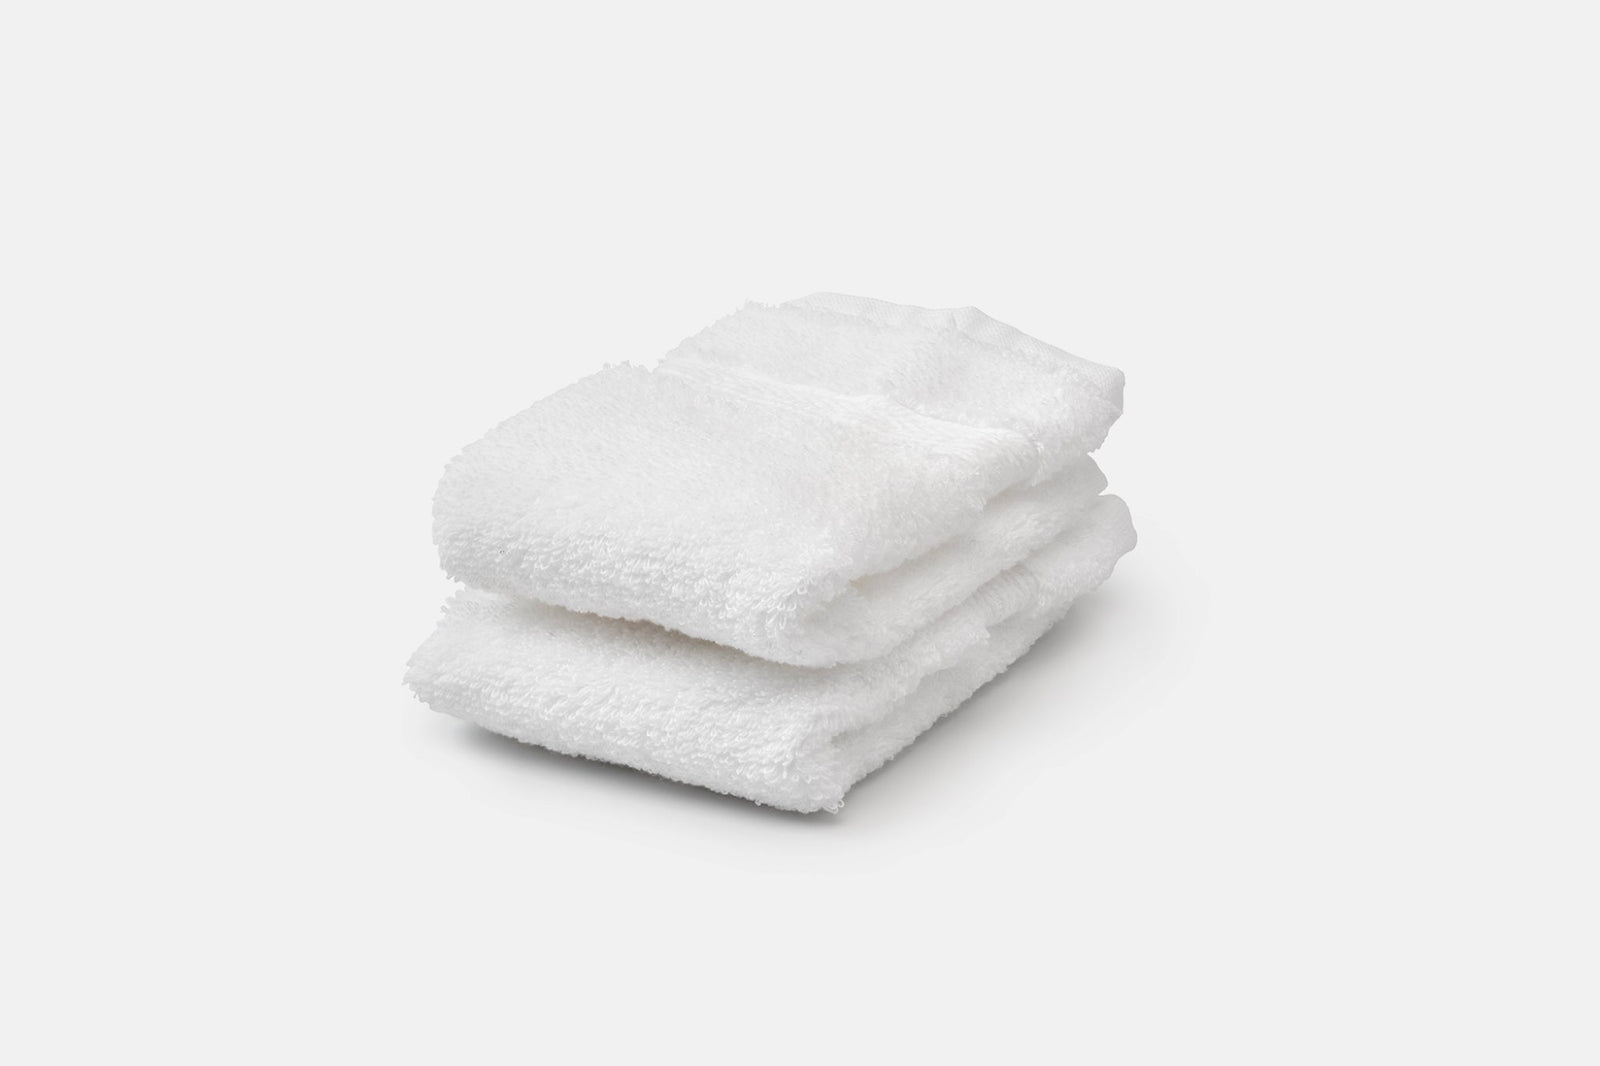 Don't Just Buy Any Bath Towels. Here's How to Pick the Right Ones